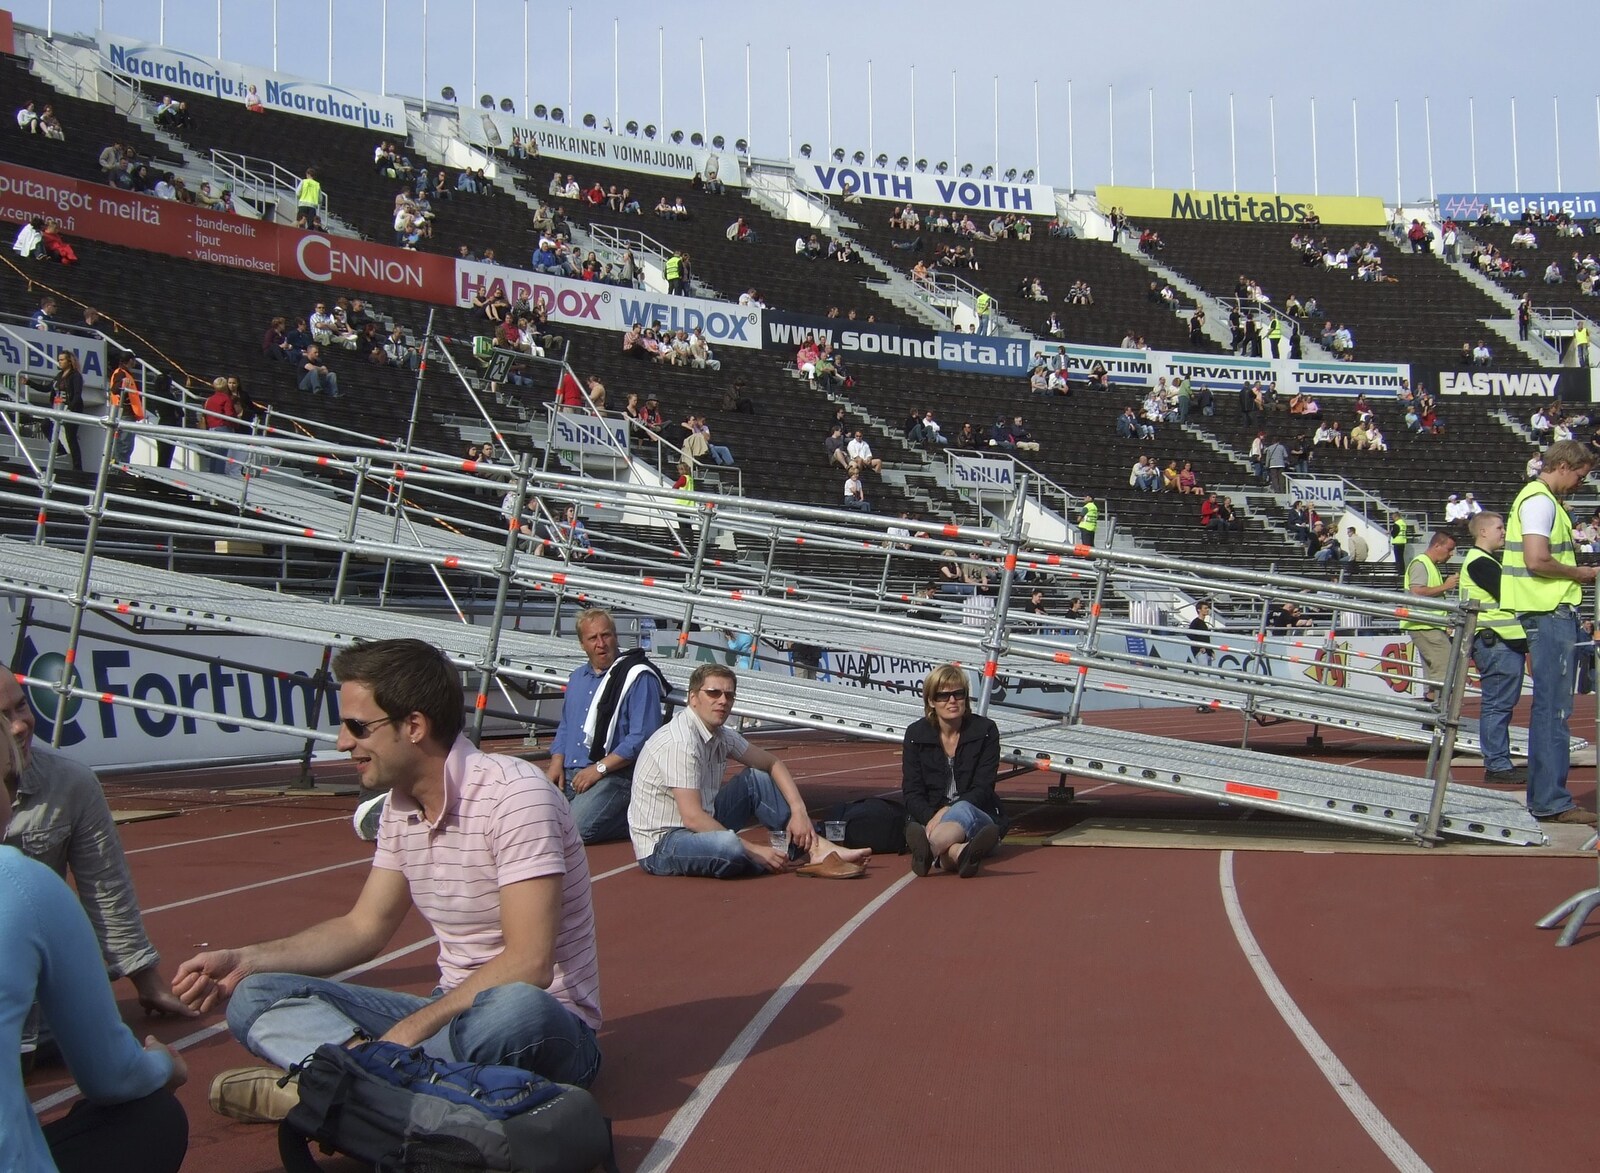 Genesis in Concert, and Suomenlinna, Helsinki, Finland - 11th June 2007: Sitting on the athletics track